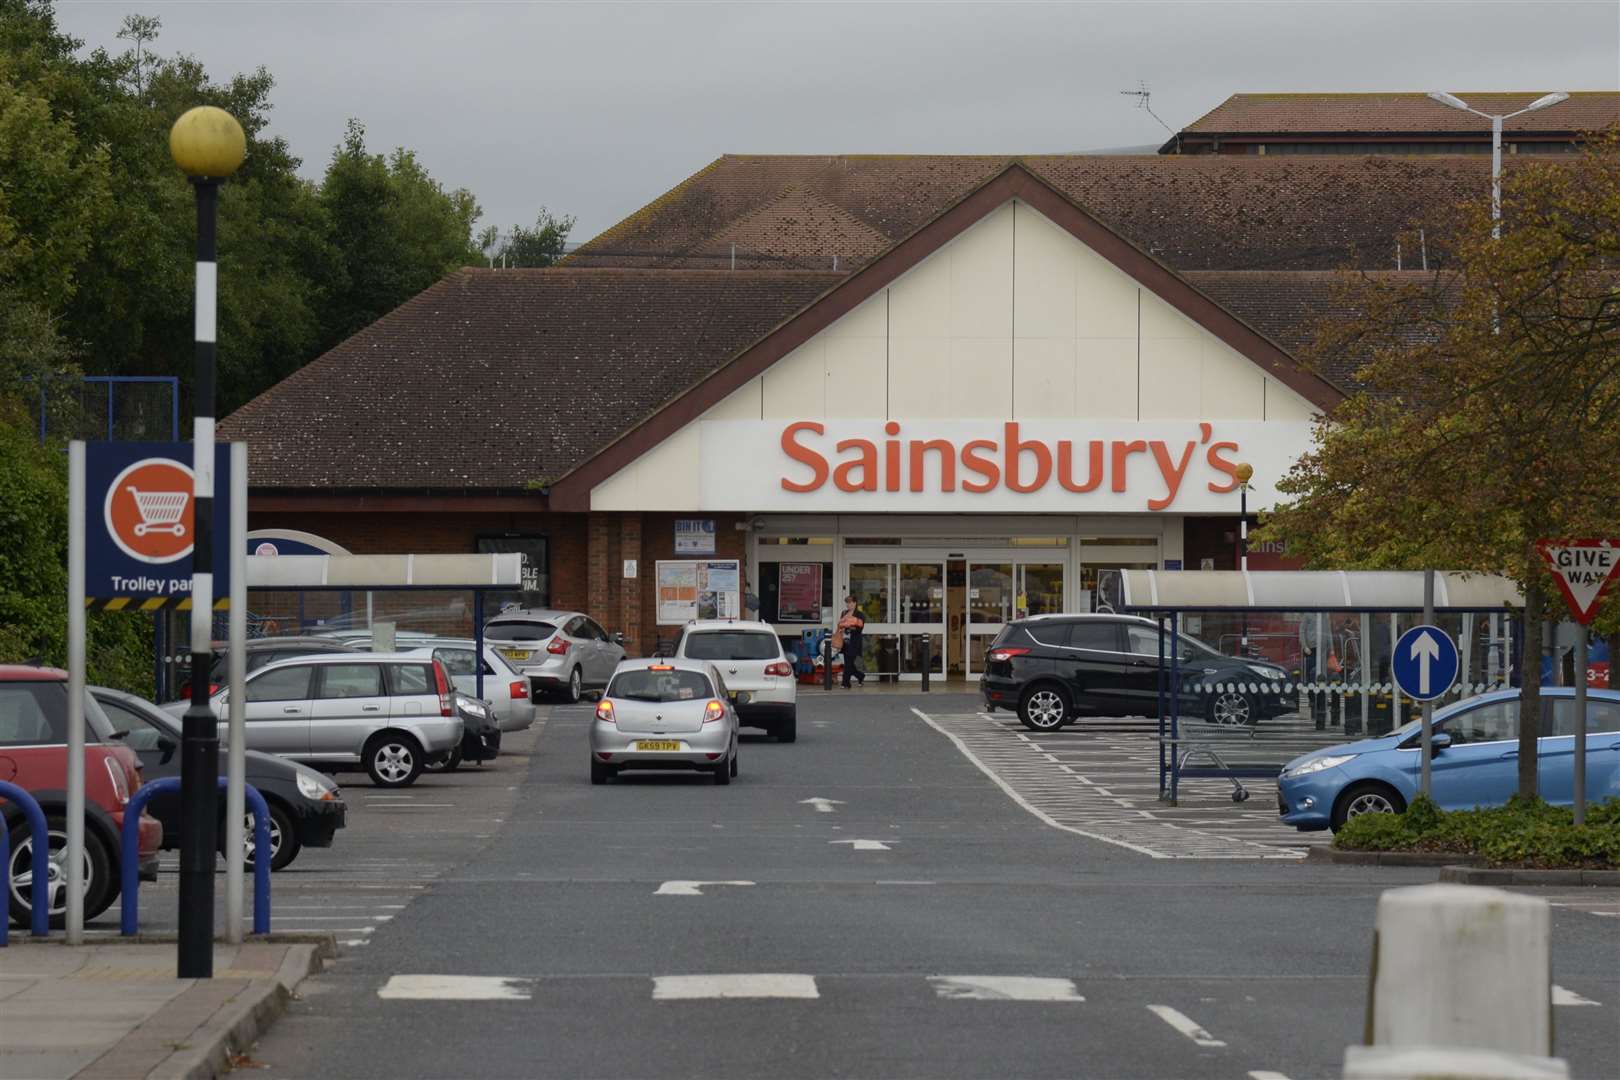 The Sainsbury's Chestfield store where the packet of nuts was purchased